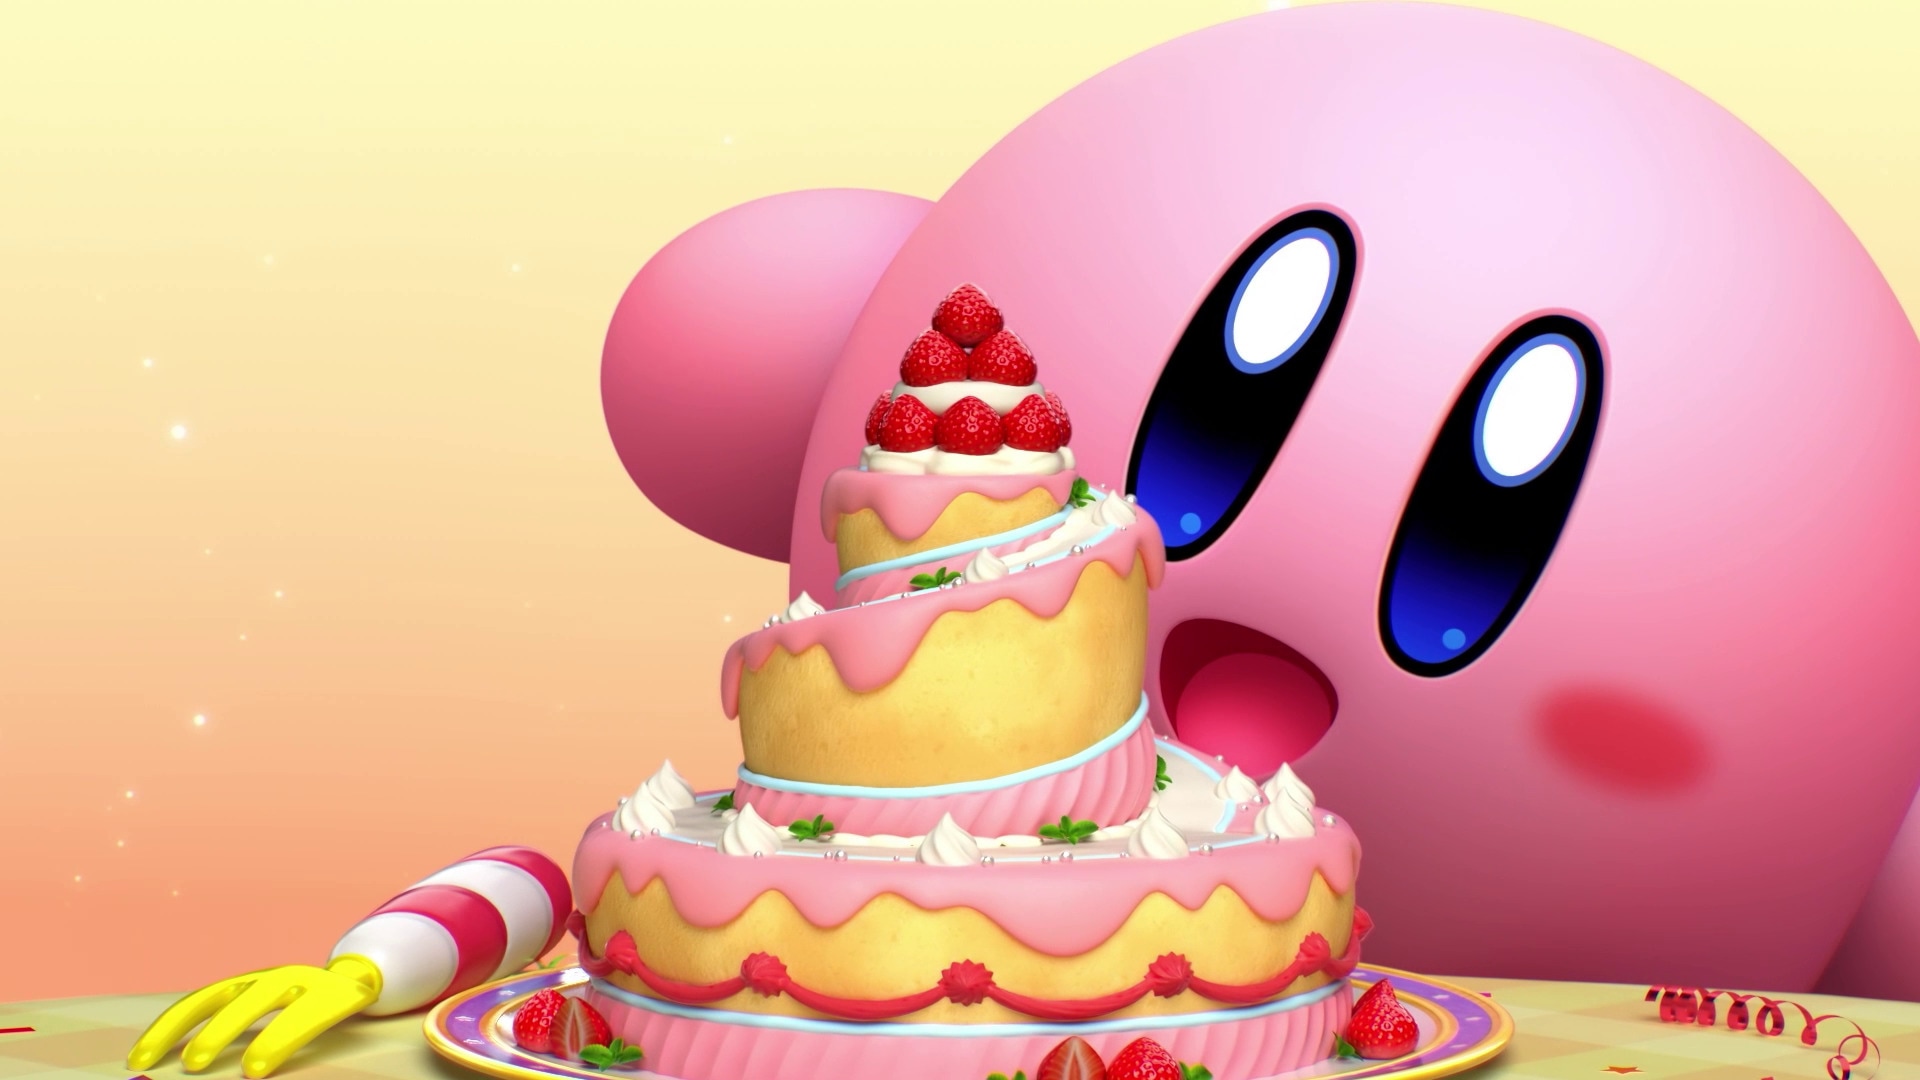 Video Game Kirby's Dream Buffet HD Wallpaper | Background Image